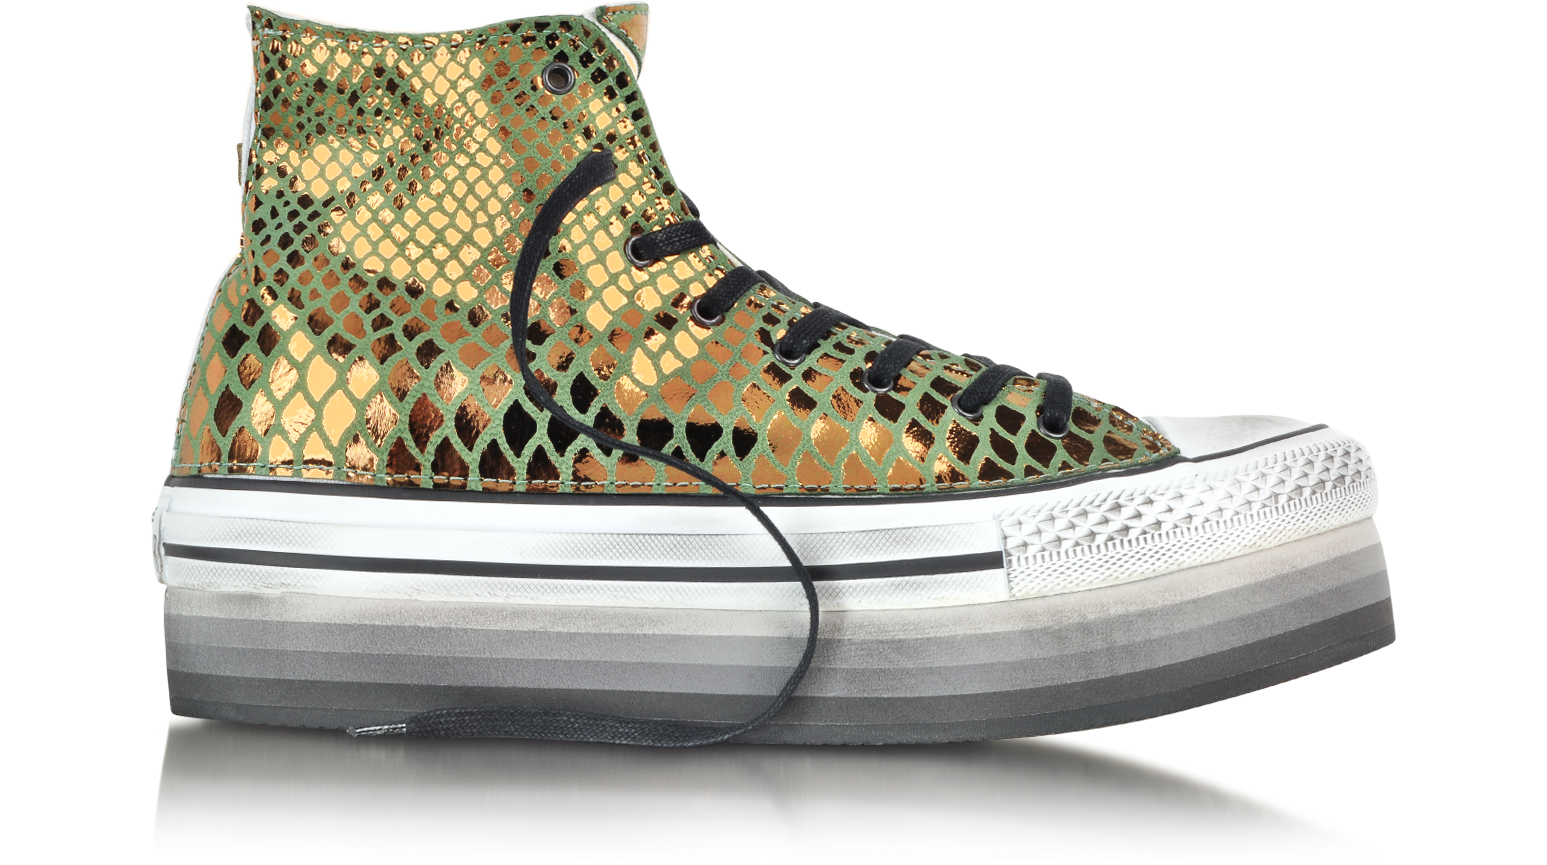 Converse Limited Edition Green Snake Printed Canvas Platform Sneaker 4.5 UK  at FORZIERI